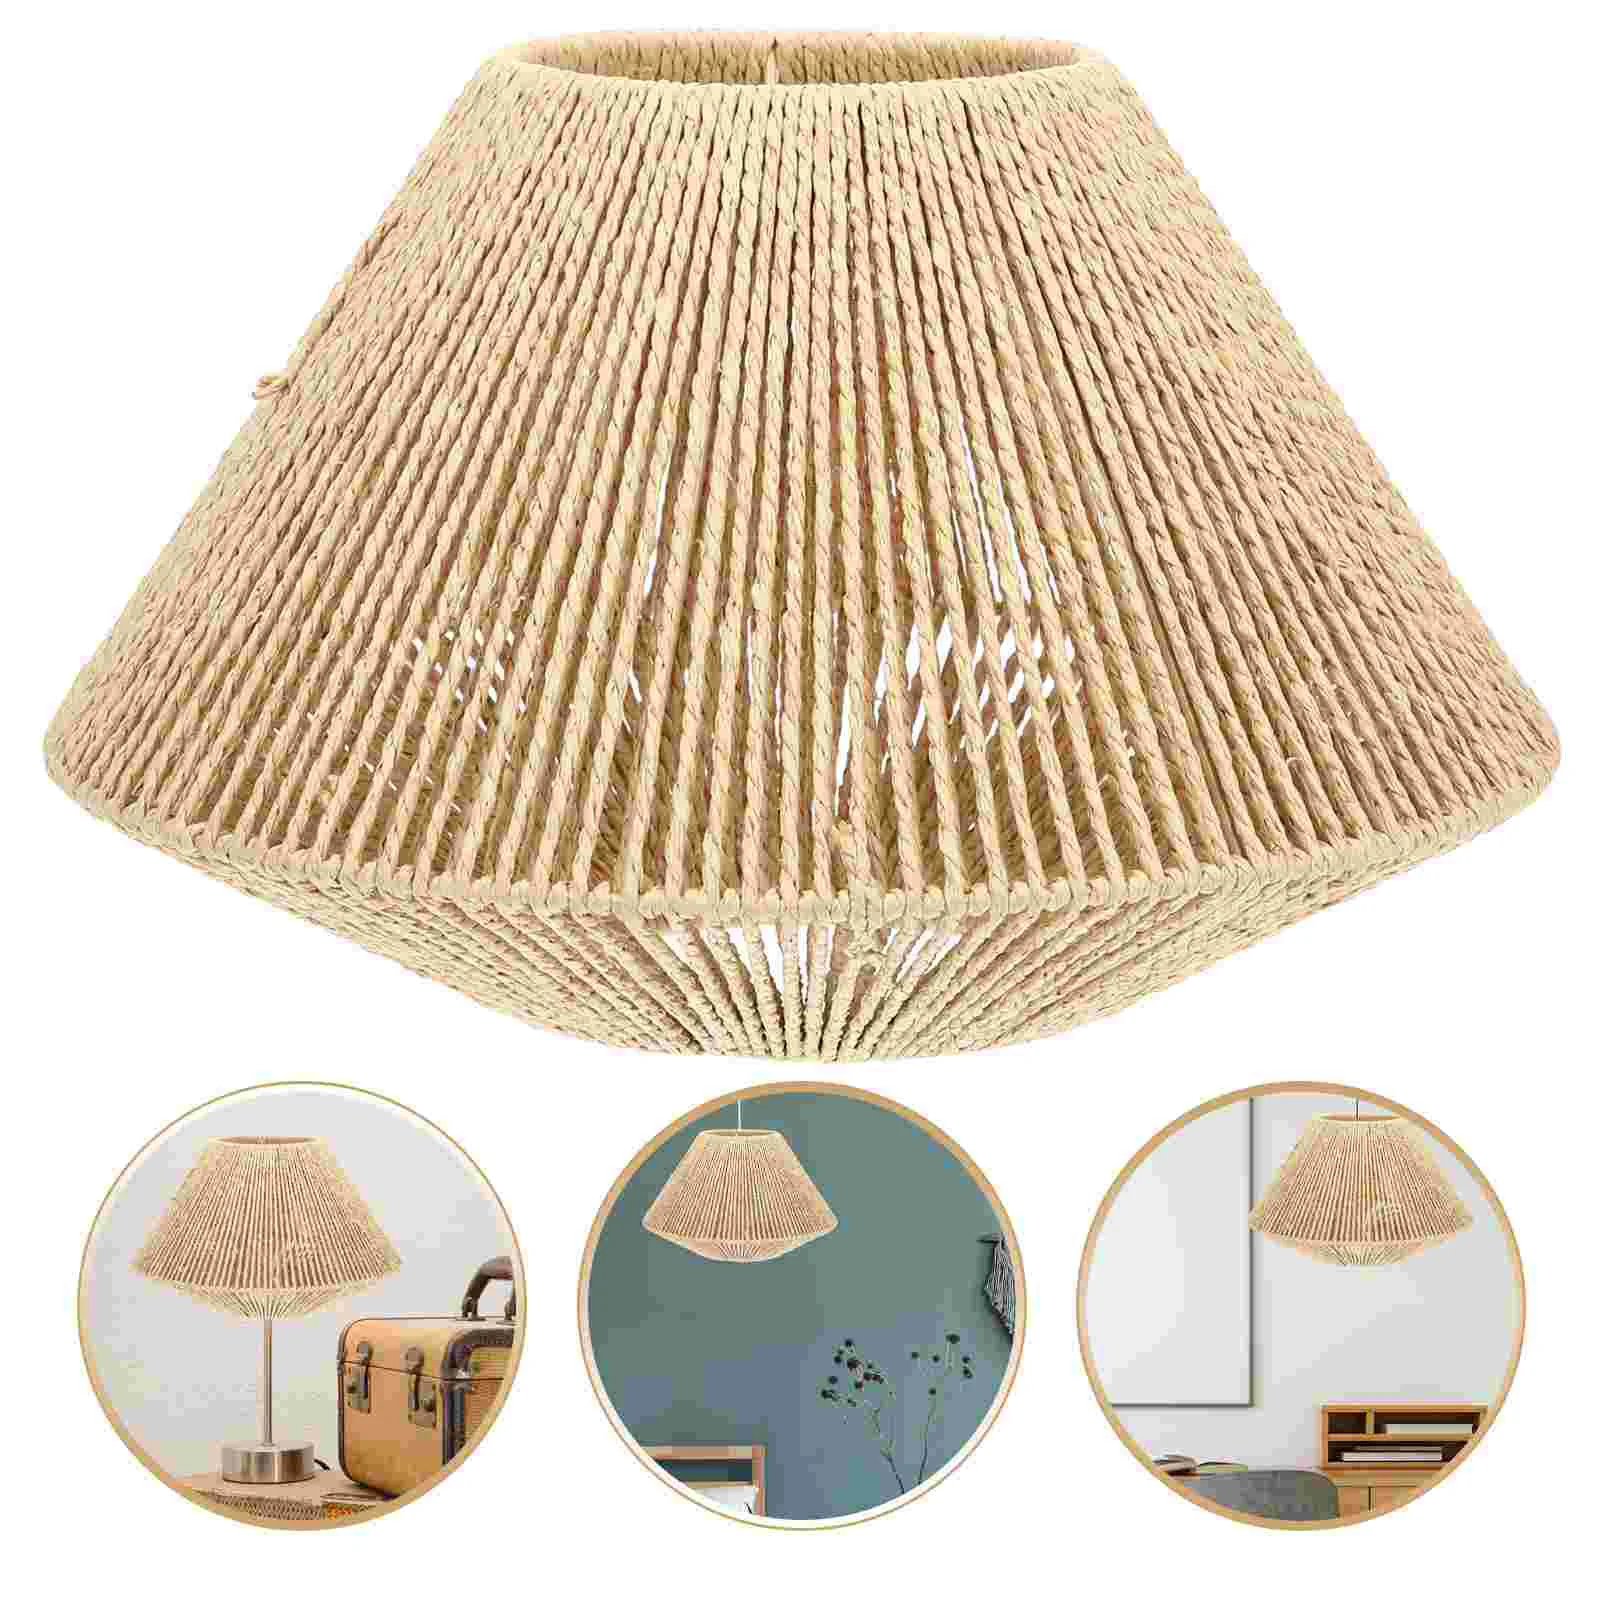 

Rattan Lampshade Hanging Light Fixture Accessory Ceiling Shades Pendant Straw Rope Cover Woven Ratan